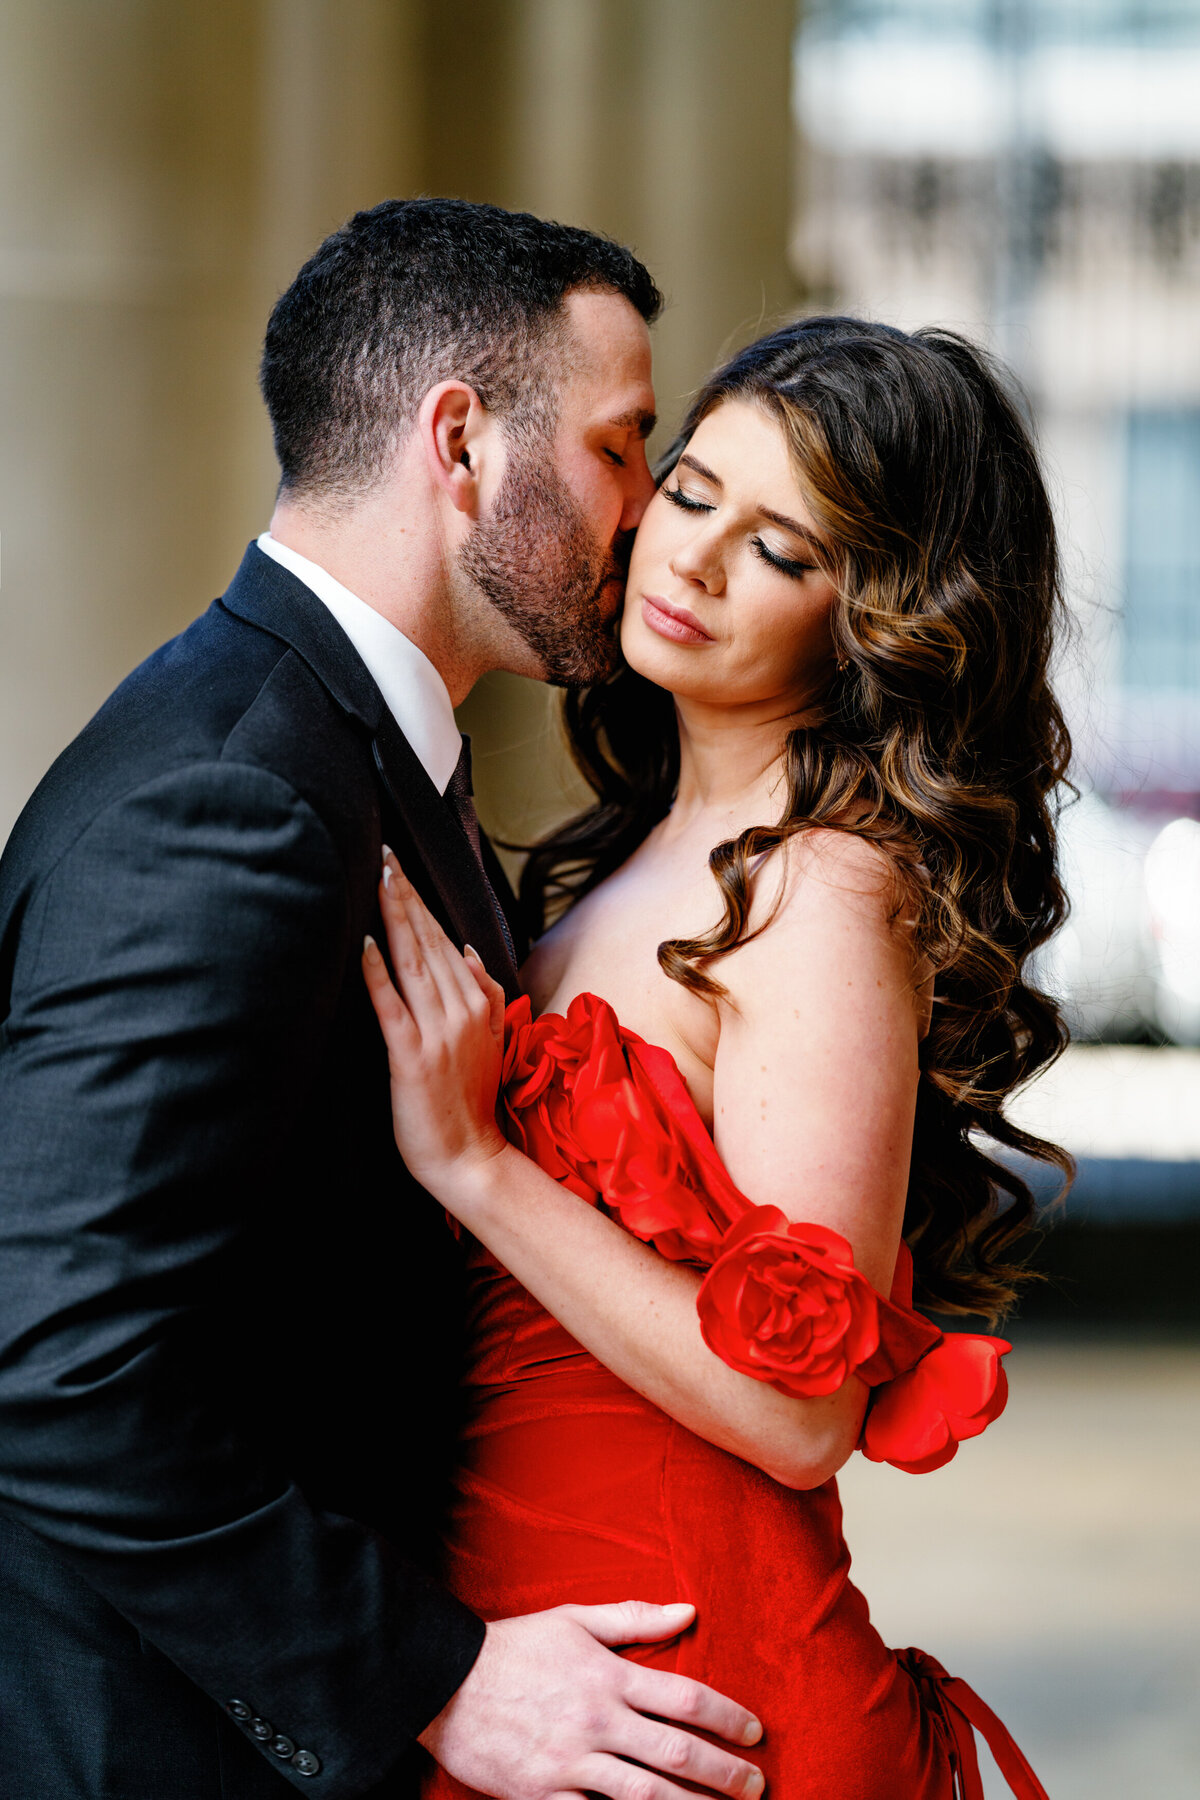 Aspen-Avenue-Chicago-Wedding-Photographer-Union-Station-Chicago-Theater-Engagement-Session-Timeless-Romantic-Red-Dress-Editorial-Stemming-From-Love-Bry-Jean-Artistry-The-Bridal-Collective-True-to-color-Luxury-FAV-63